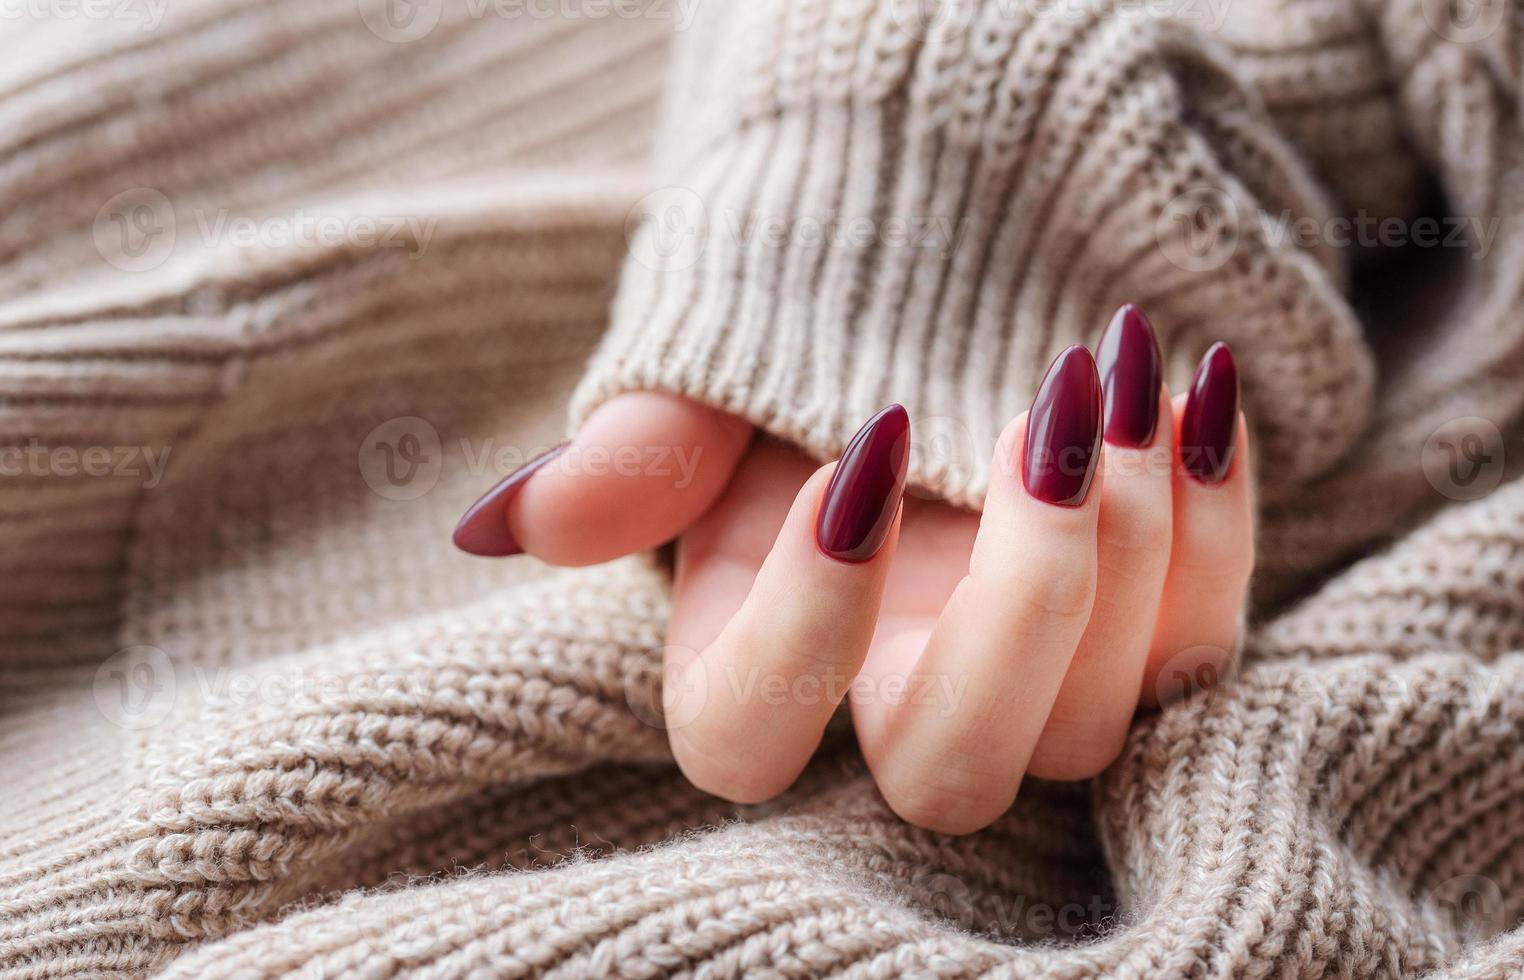 Hands of a young woman with dark red manicure on nails photo